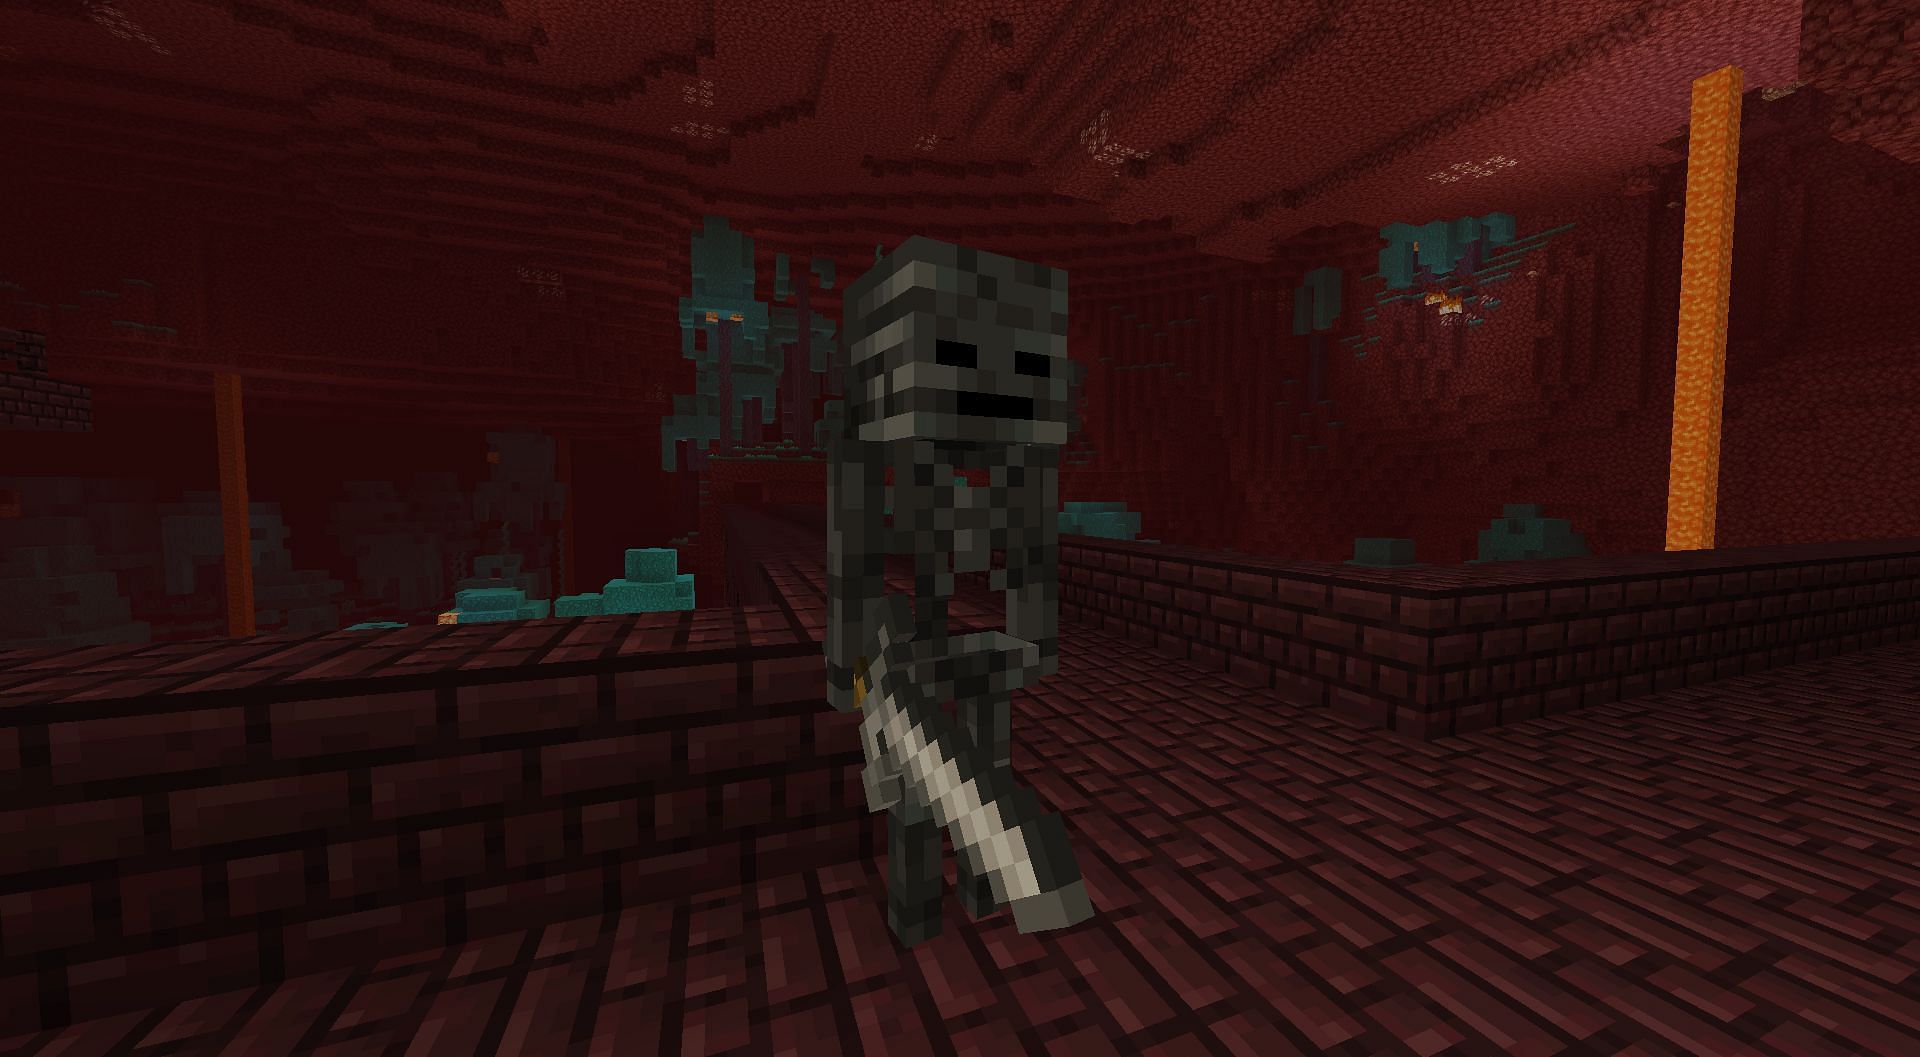 Wither Skeletons can drop rare wither skulls upon death in Minecraft (Image via Mojang)